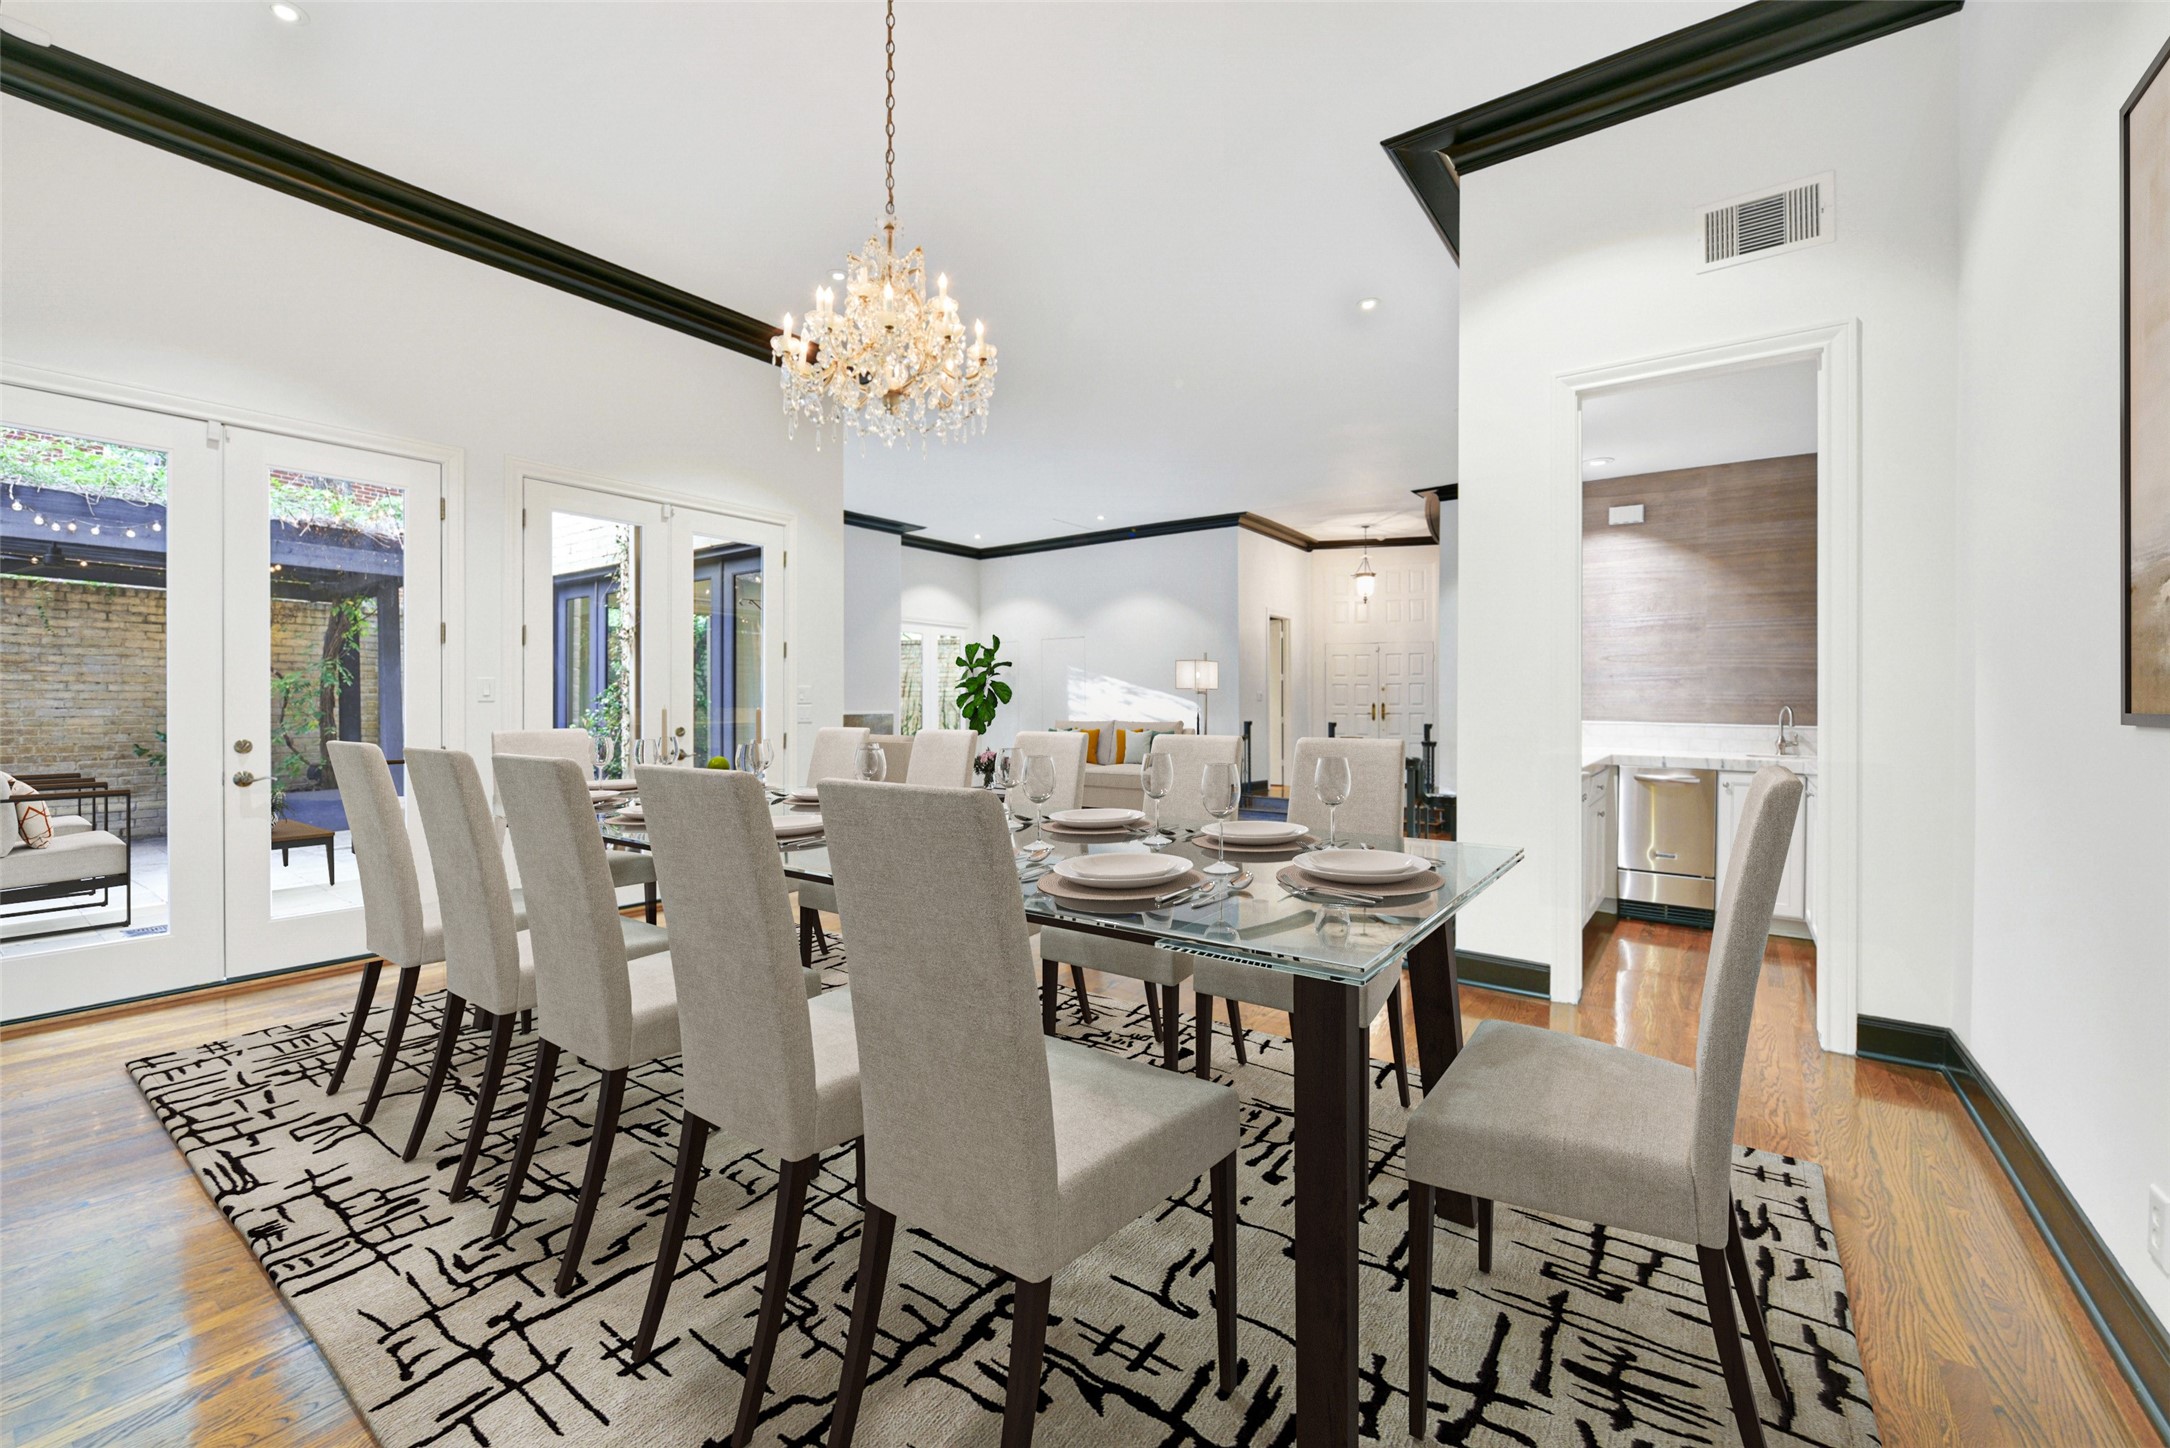 The formal dining room is perfect for large dinner gatherings and entertaining. The adjacent wet bar opens to the living room offering versatile serving options.